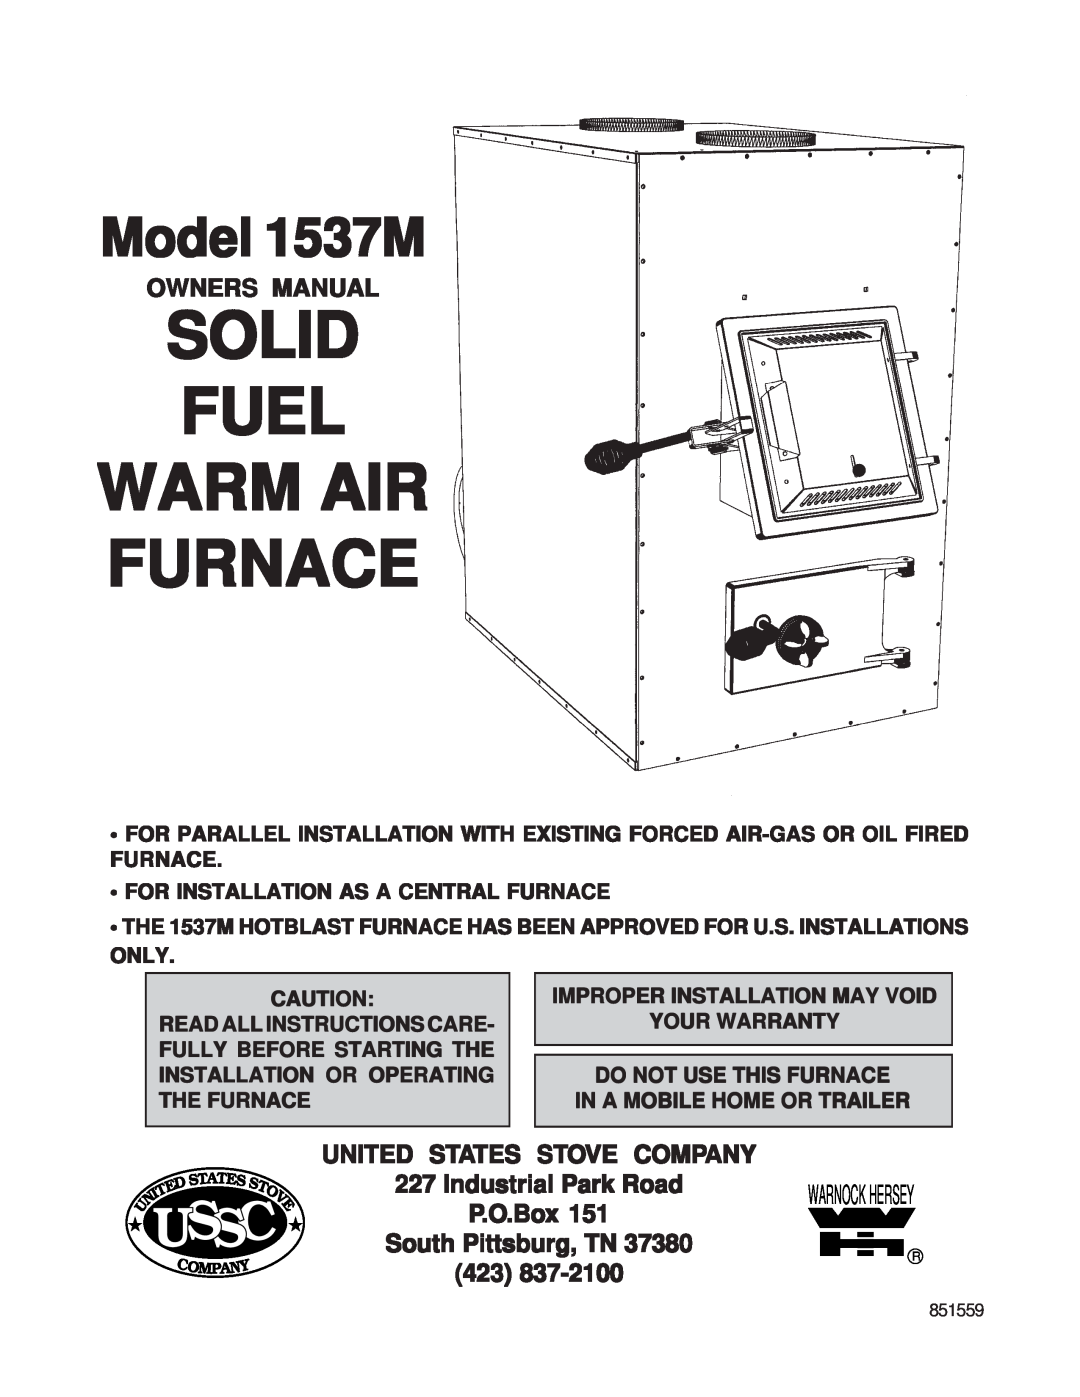 United States Stove owner manual Model 1537M, United States Stove Company, Solid Fuel Warm Air Furnace, Ussc, P.O.Box 